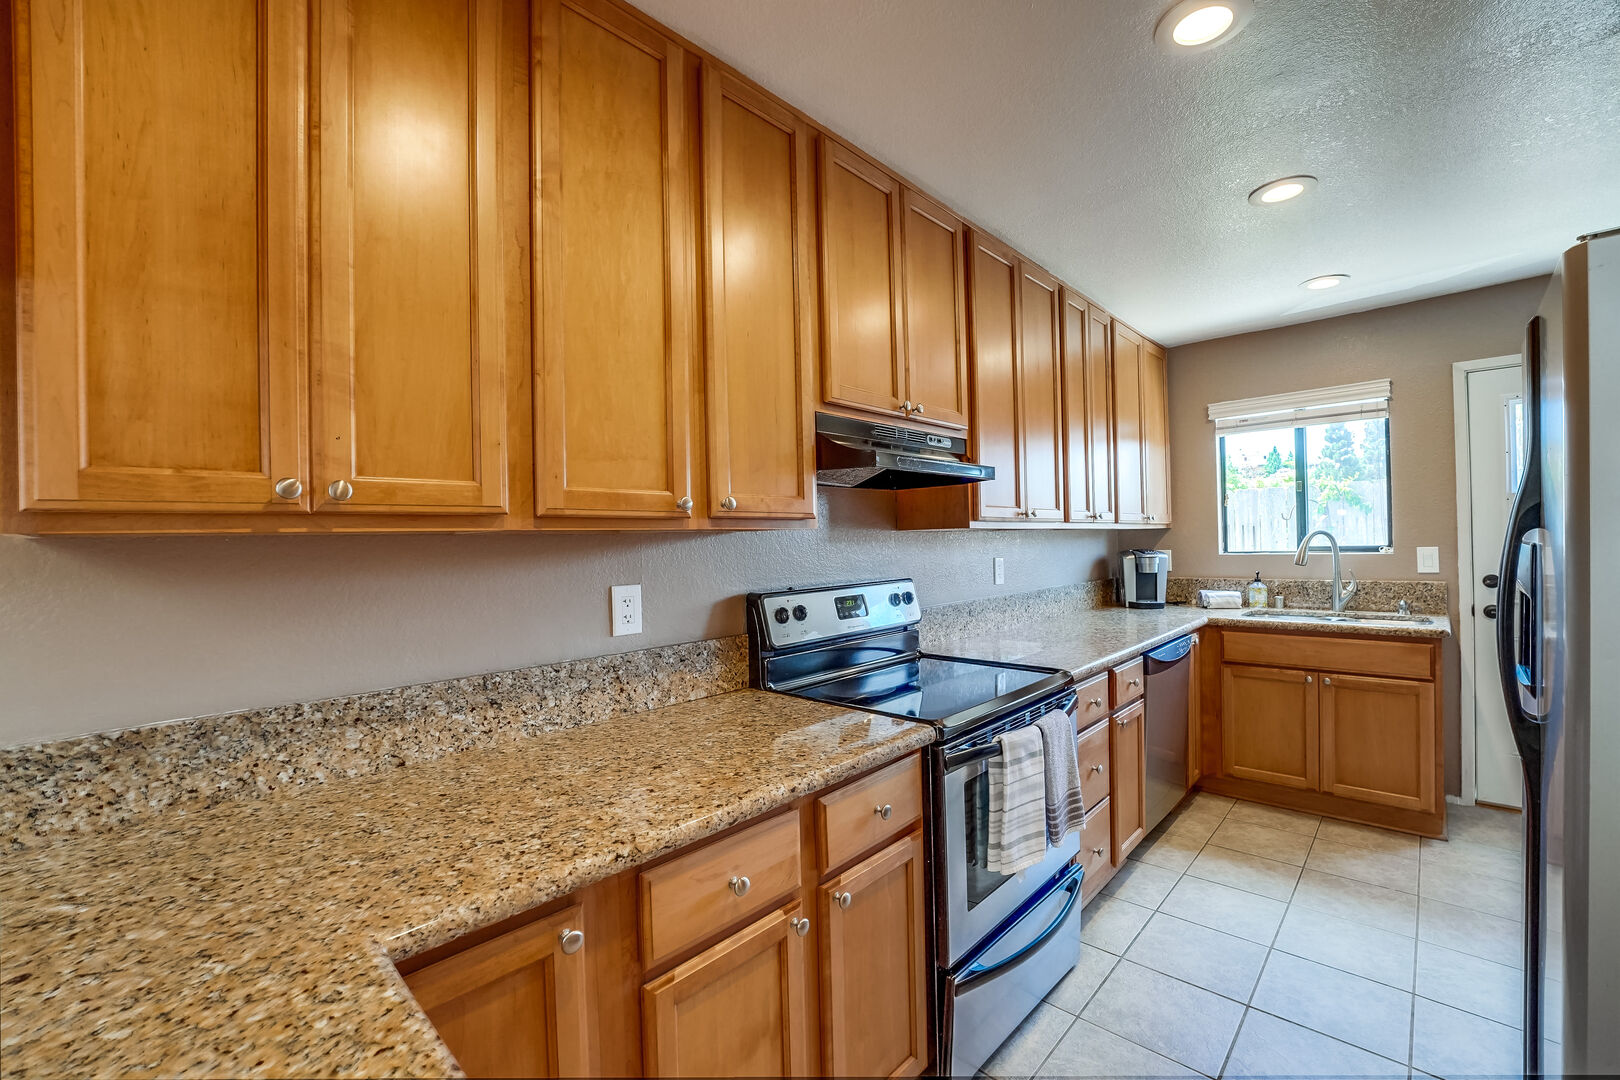 Kitchen is fully equipped to make meals at home. Dishwasher, stove, oven, microwave, large refrigerator, standard and Keurig coffee makers and adequate cook and dishware provided